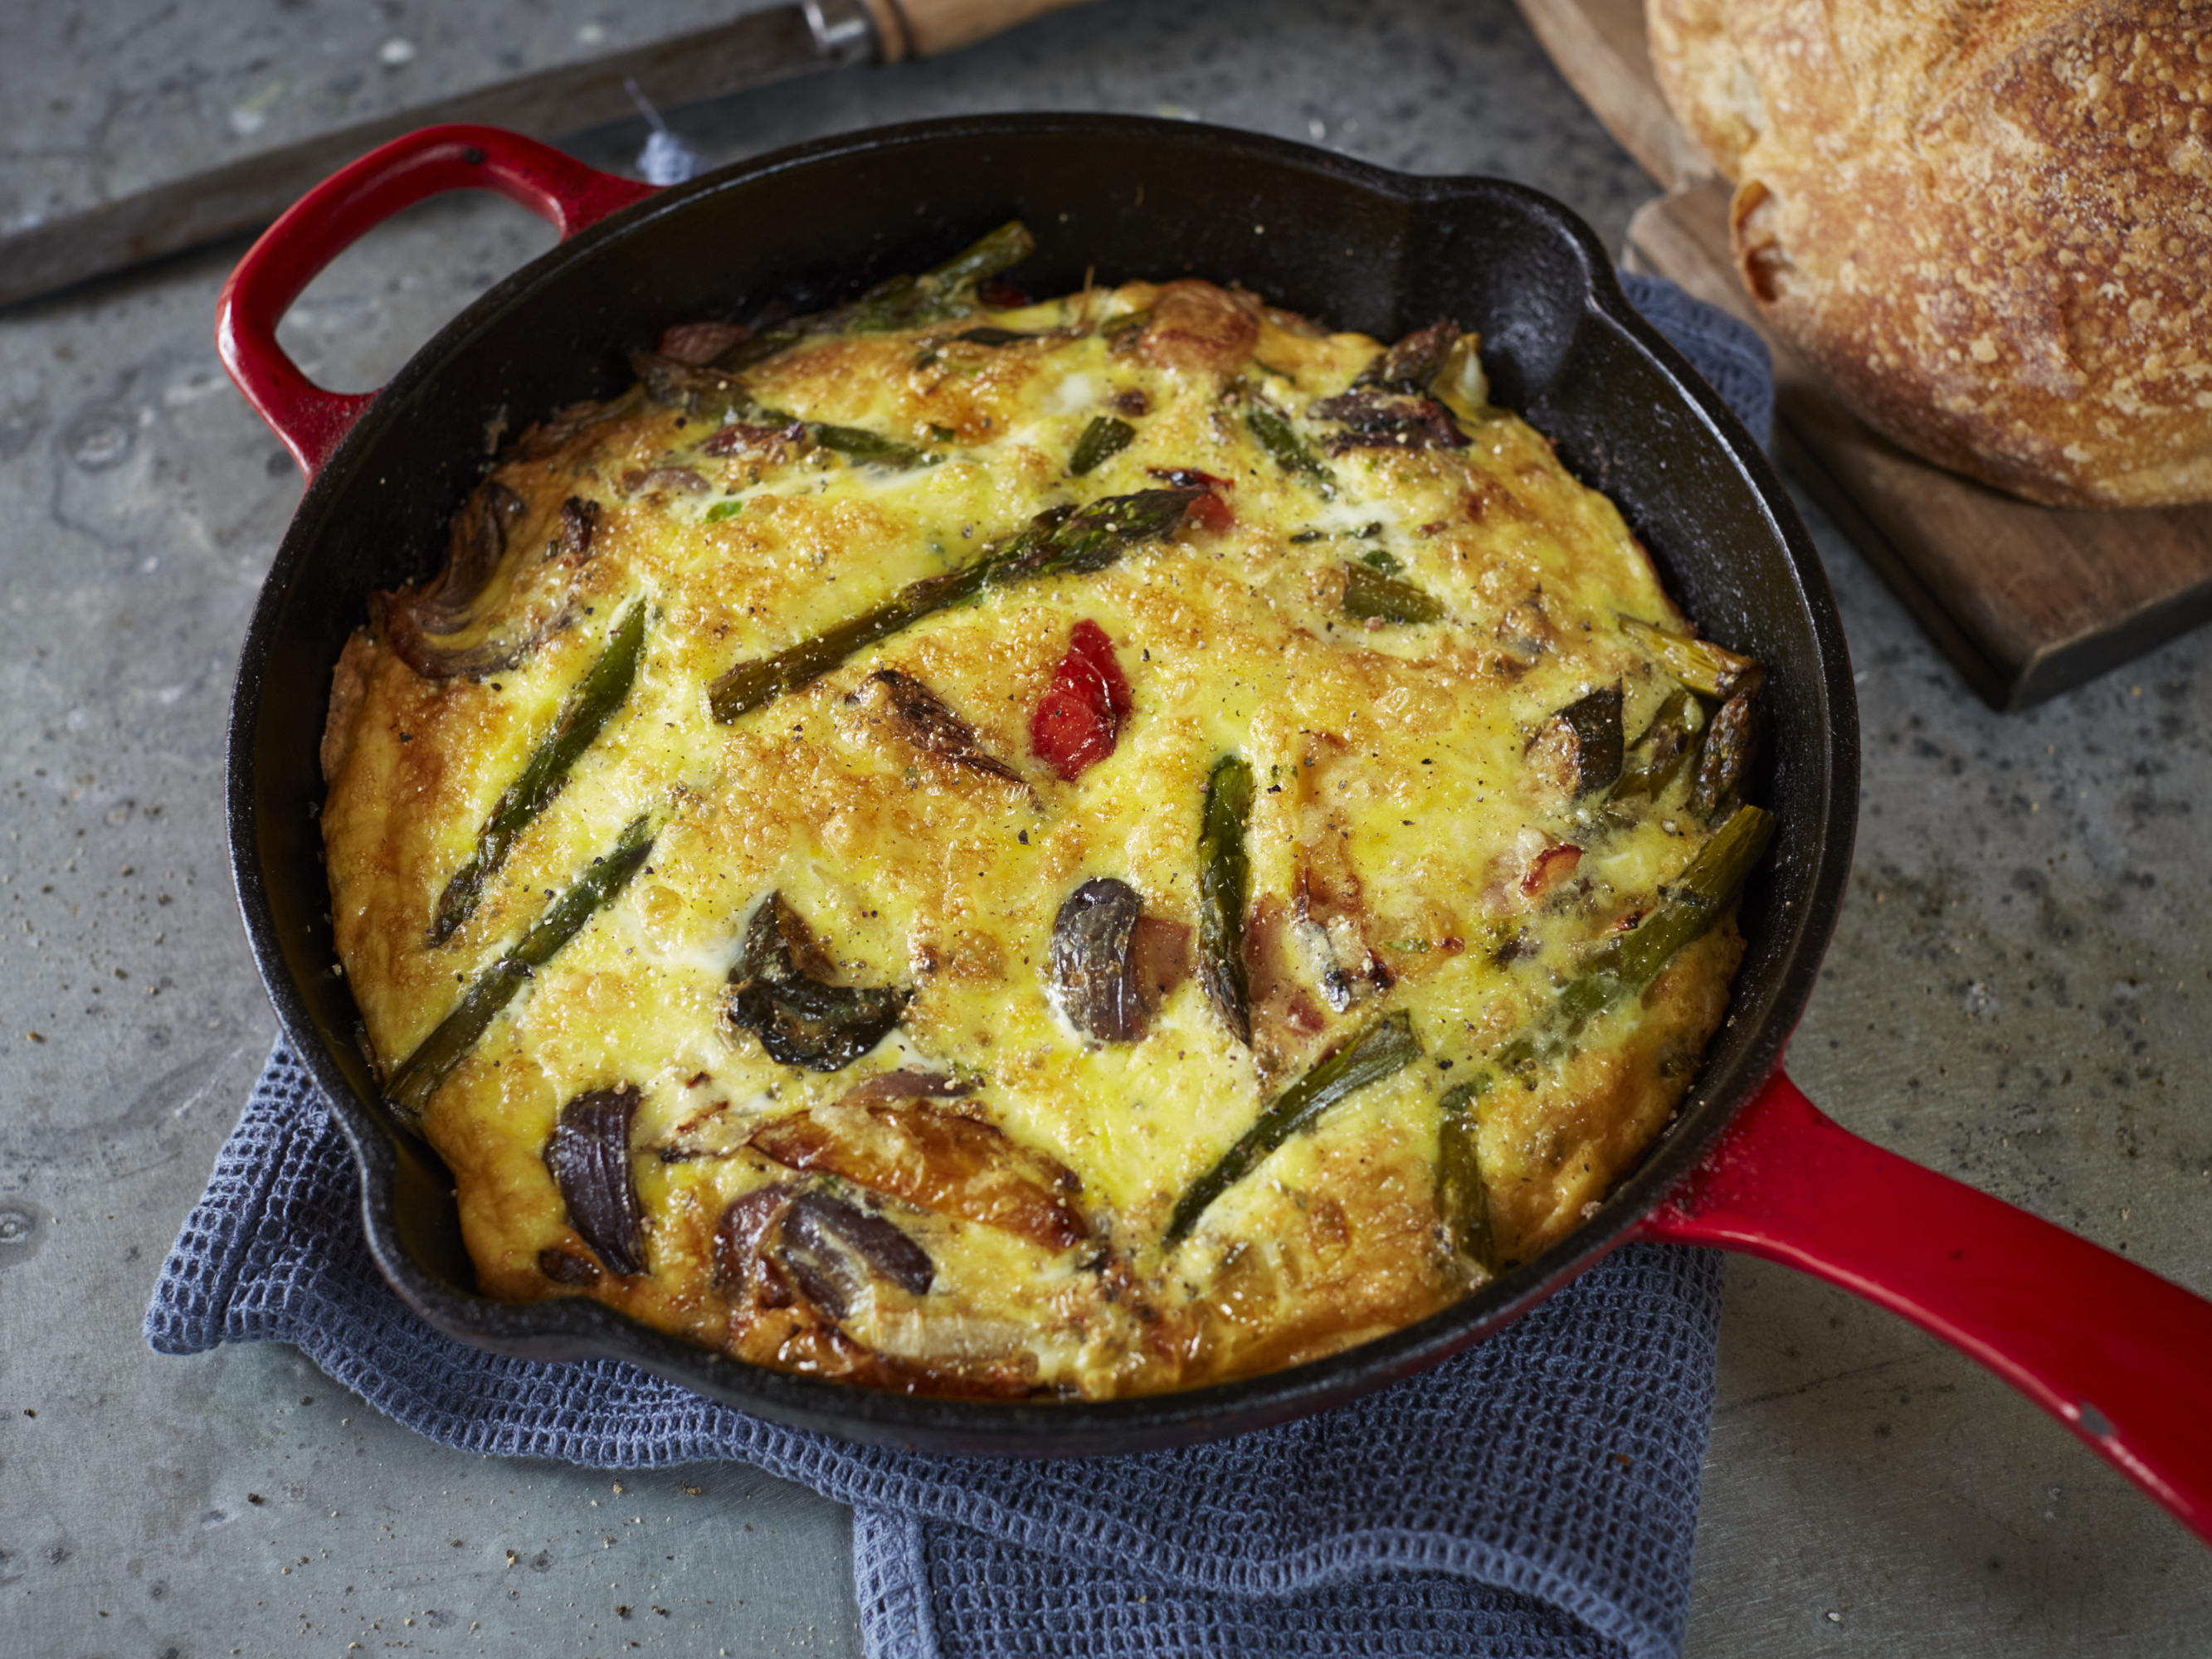 Vegetable frittata with bacon and oregano